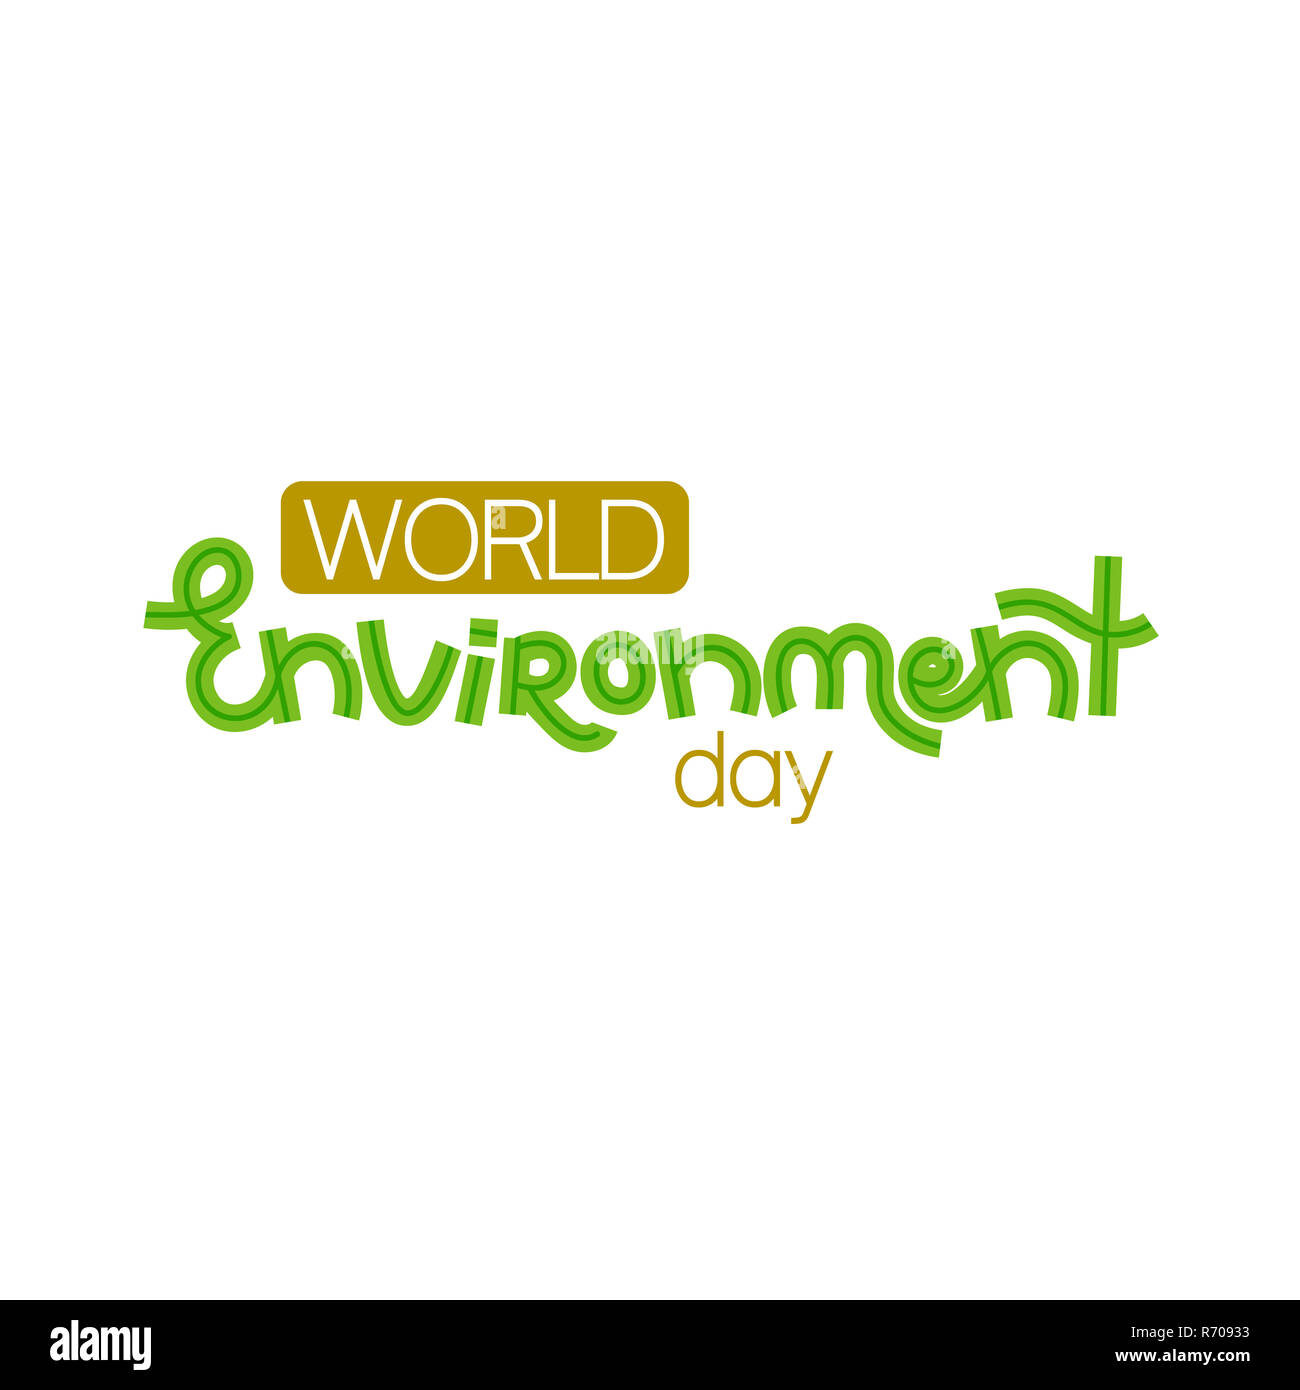 World environment day. Creative hand drawn lettering. Save nature. Eco friendly design. It can be used for banner, poster, invitation, card, brochure Stock Photo